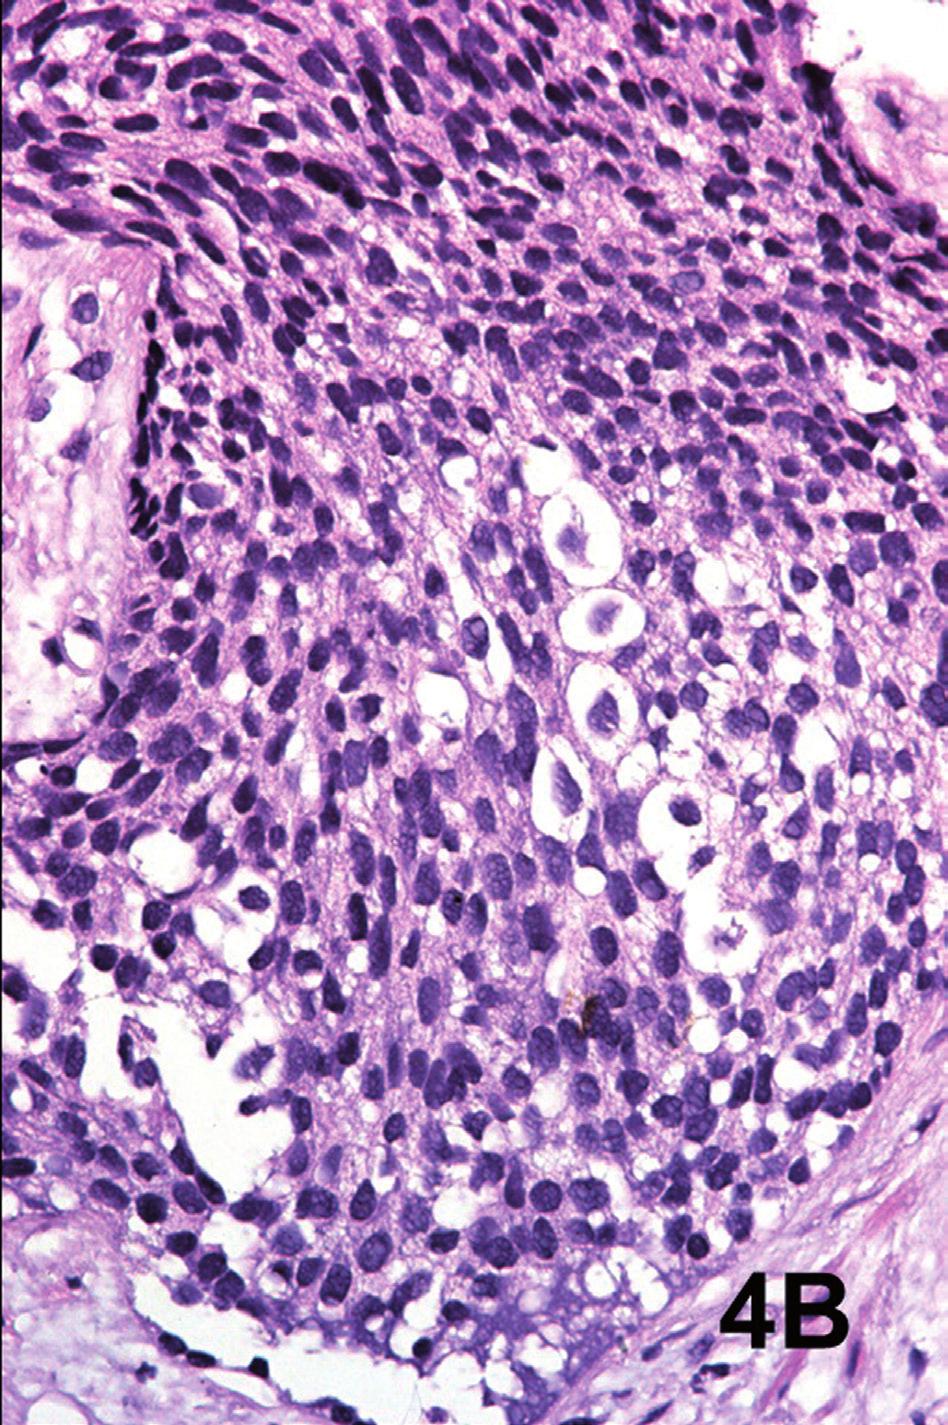 The neoplasm infiltrates ducts of varying diameter and comedonecrosis is observed in a mayor duct.